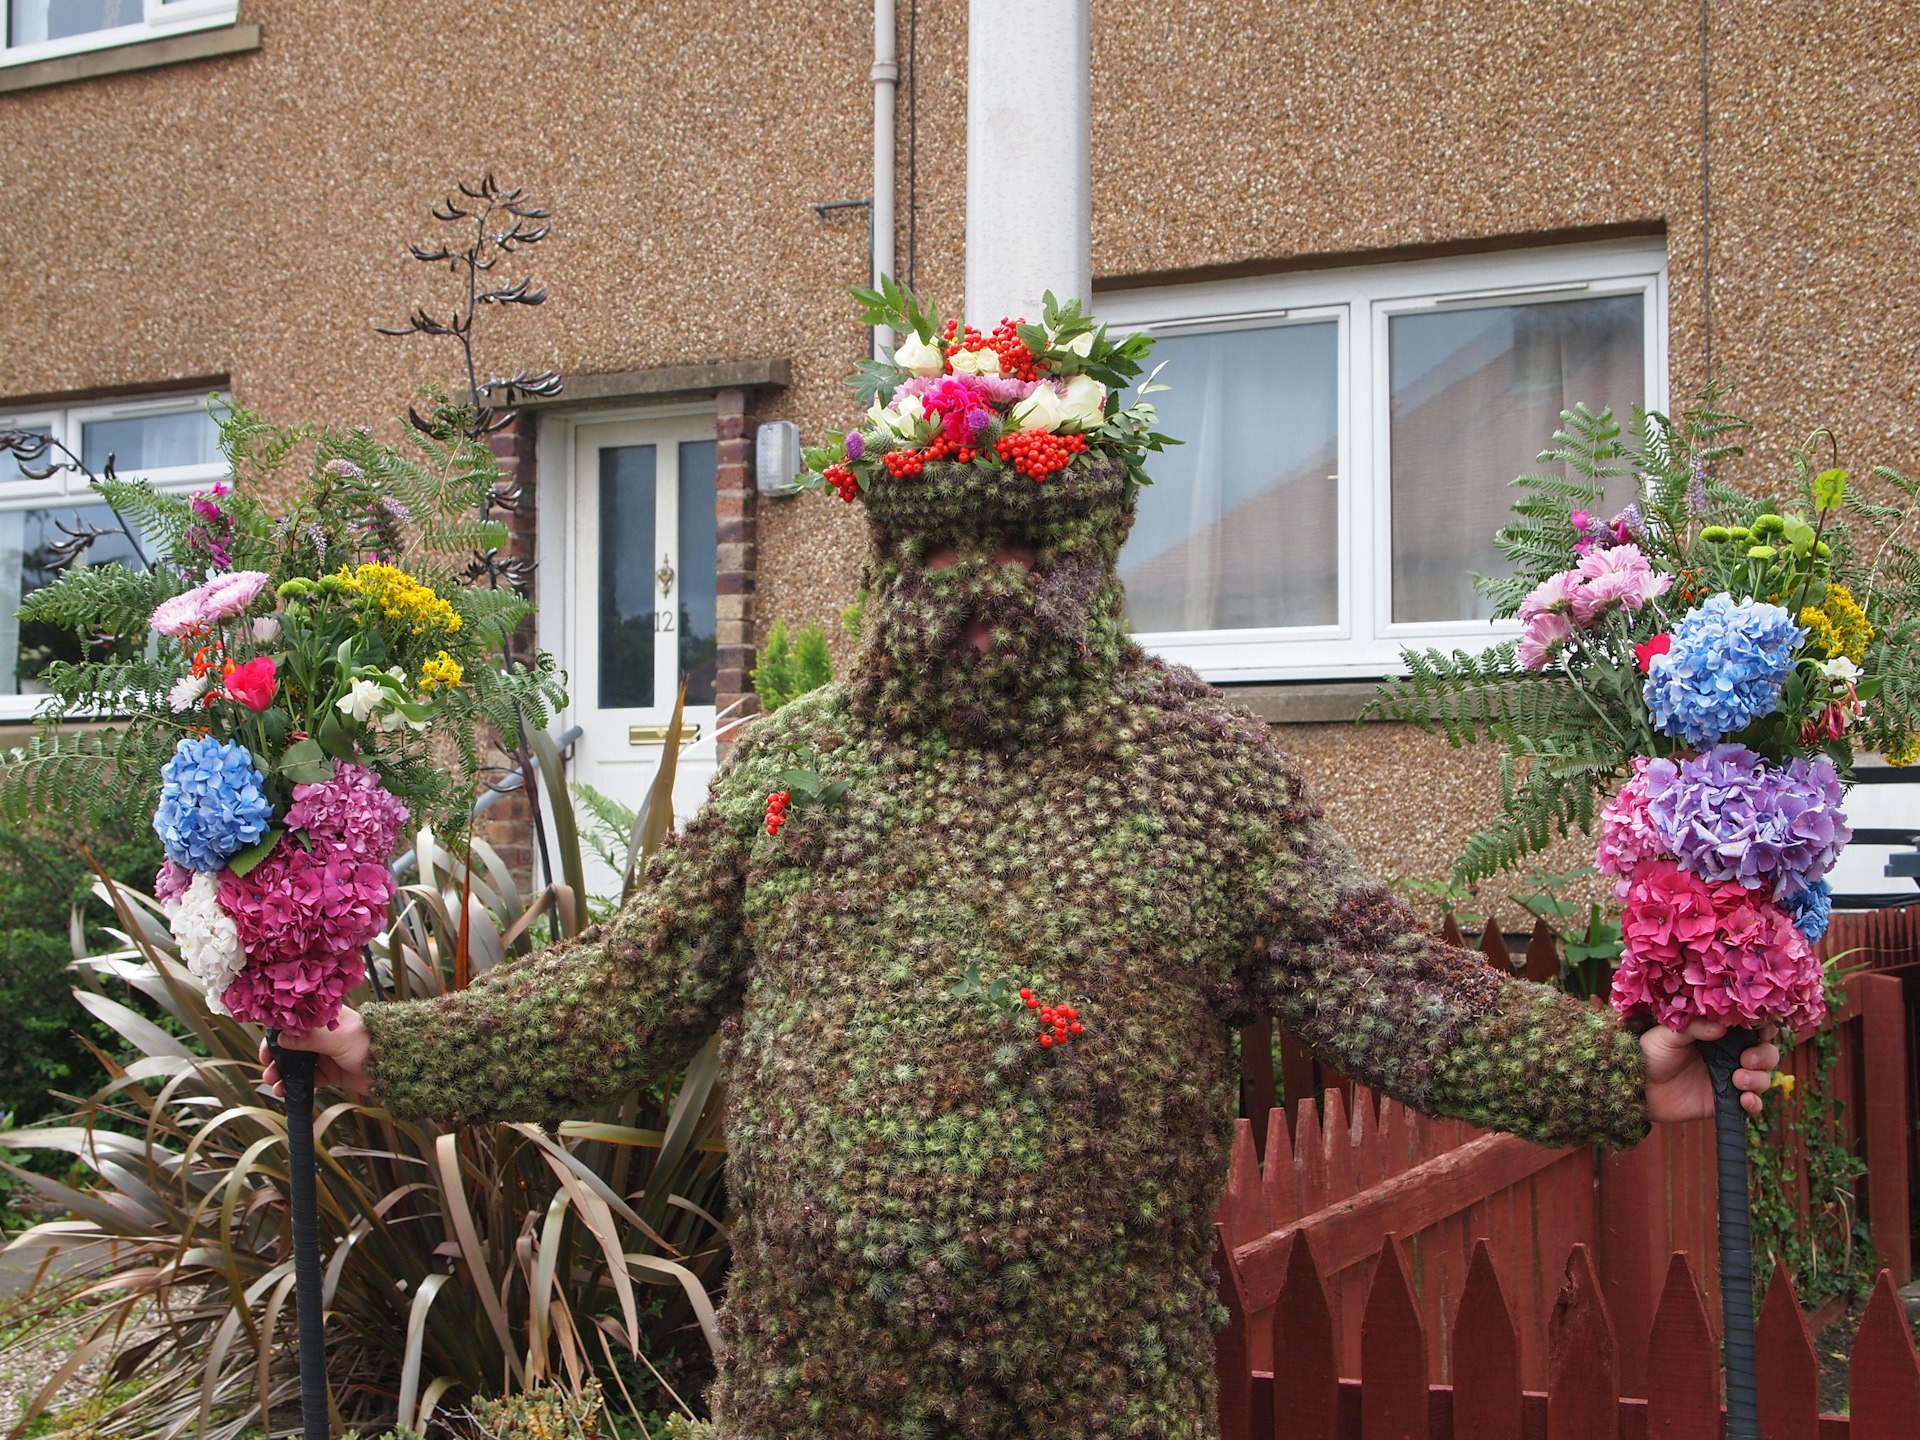 A person completely covered in a costume of dark green seeds, holding bunches of flowers